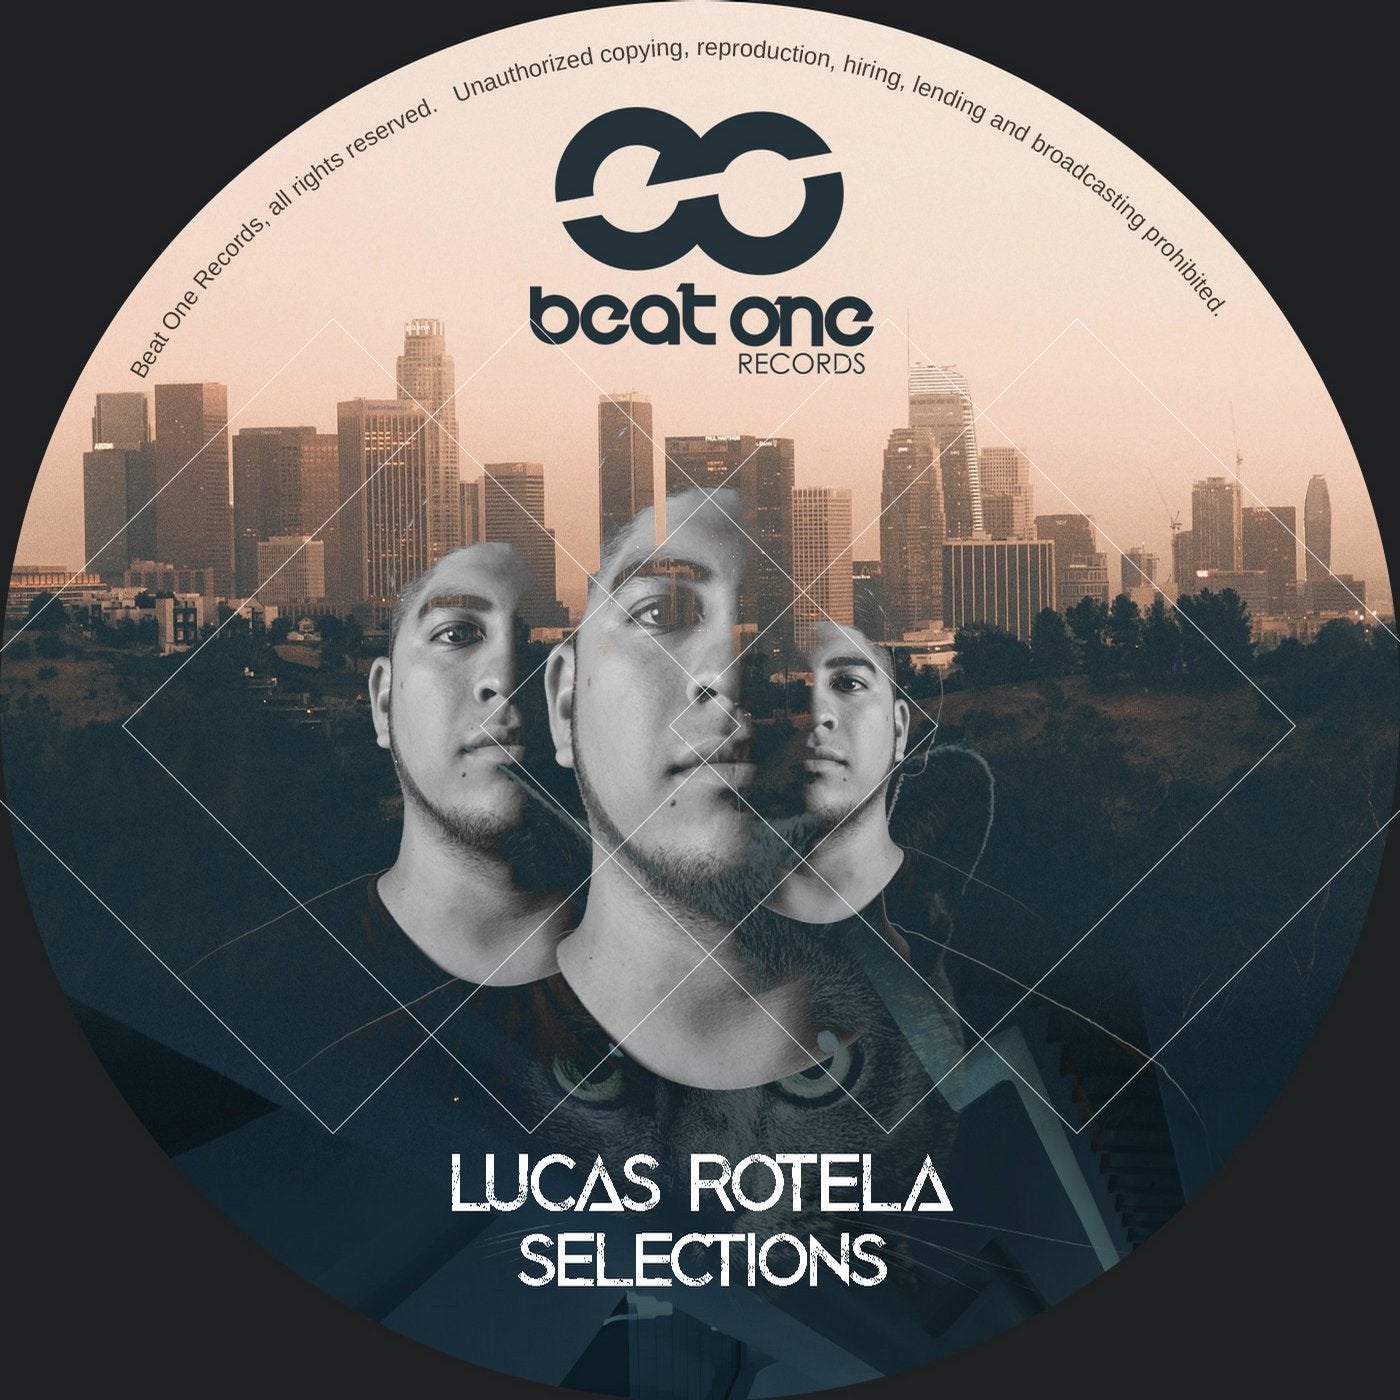 Lucas Rotela Selections